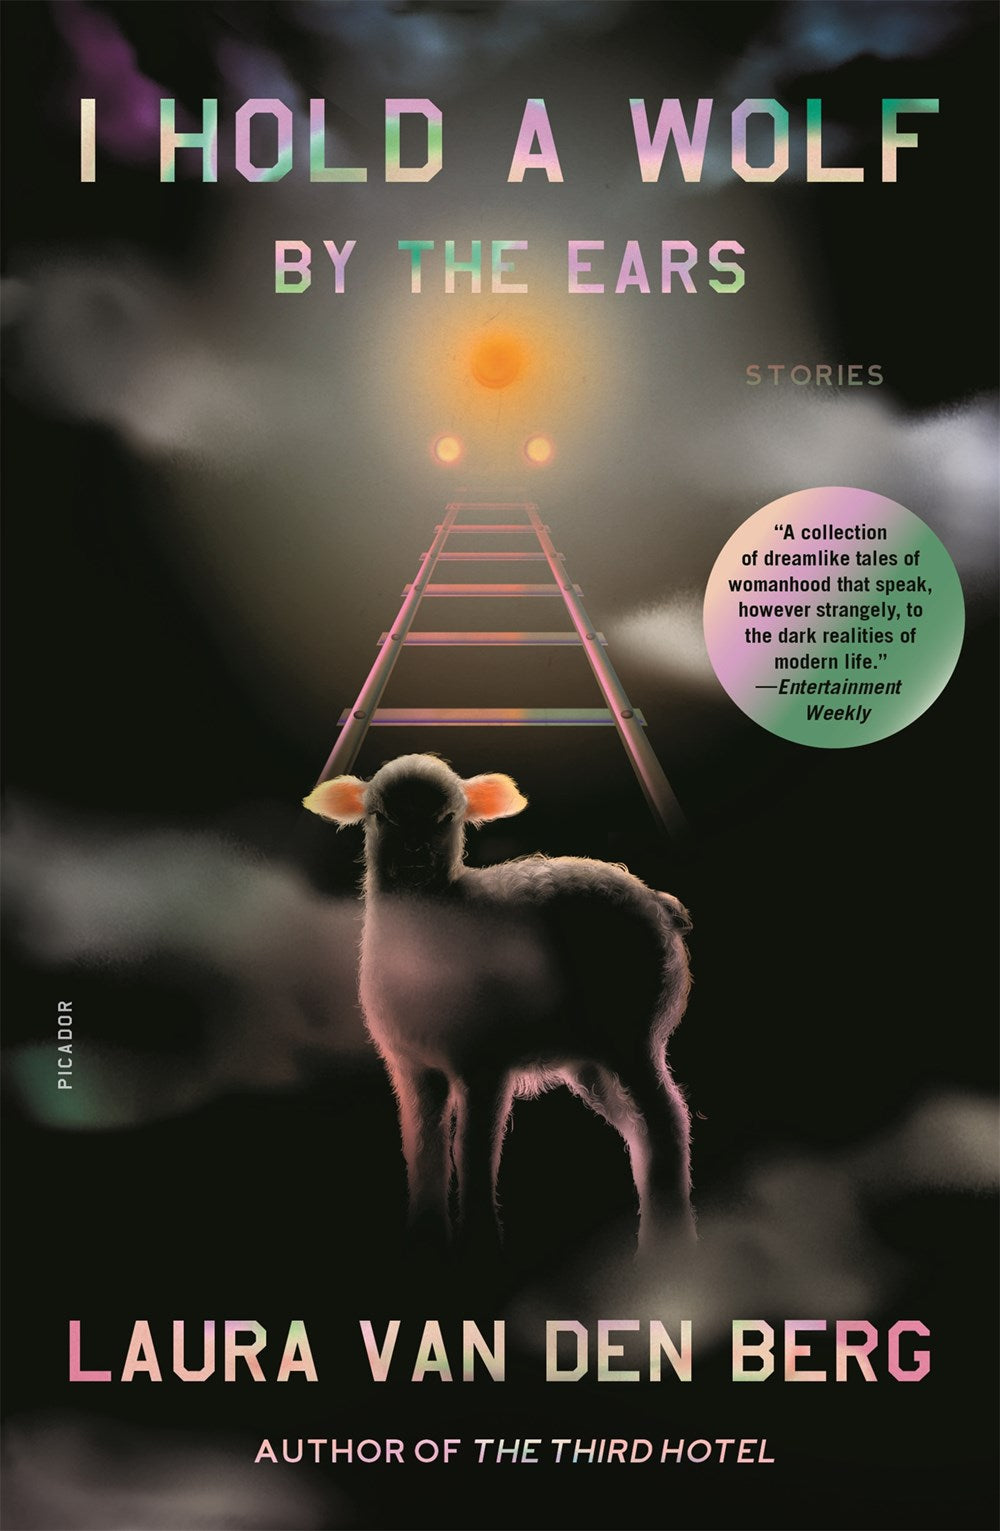 I Hold a Wolf By the Ears: Stories by Laura van den Berg